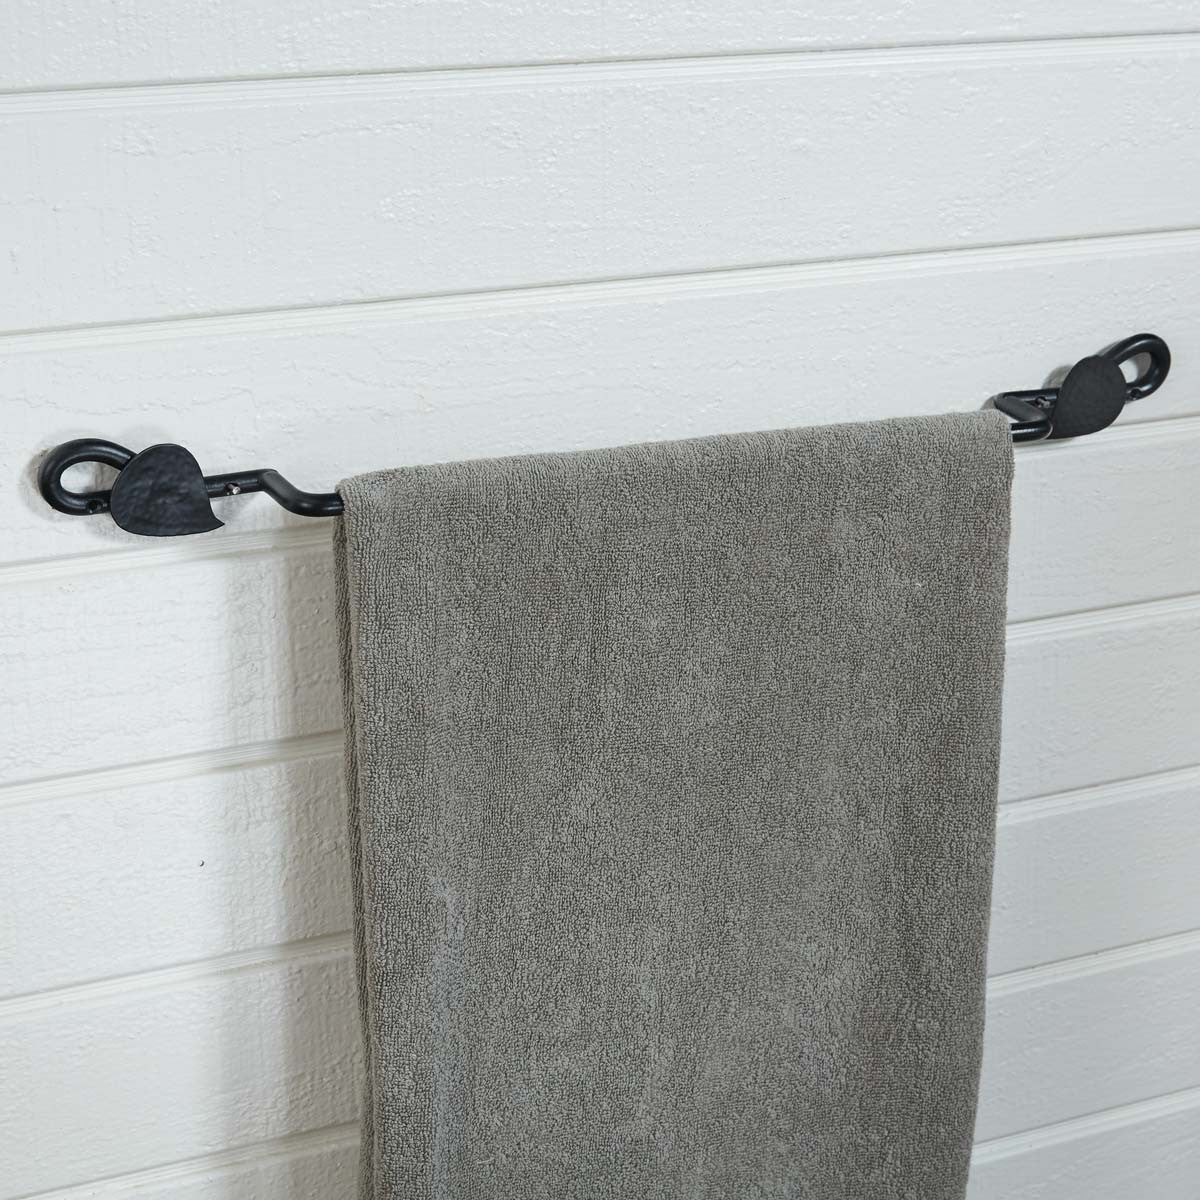 Forged Leaf Towel Bar - 16" or 24" | Iron Accents